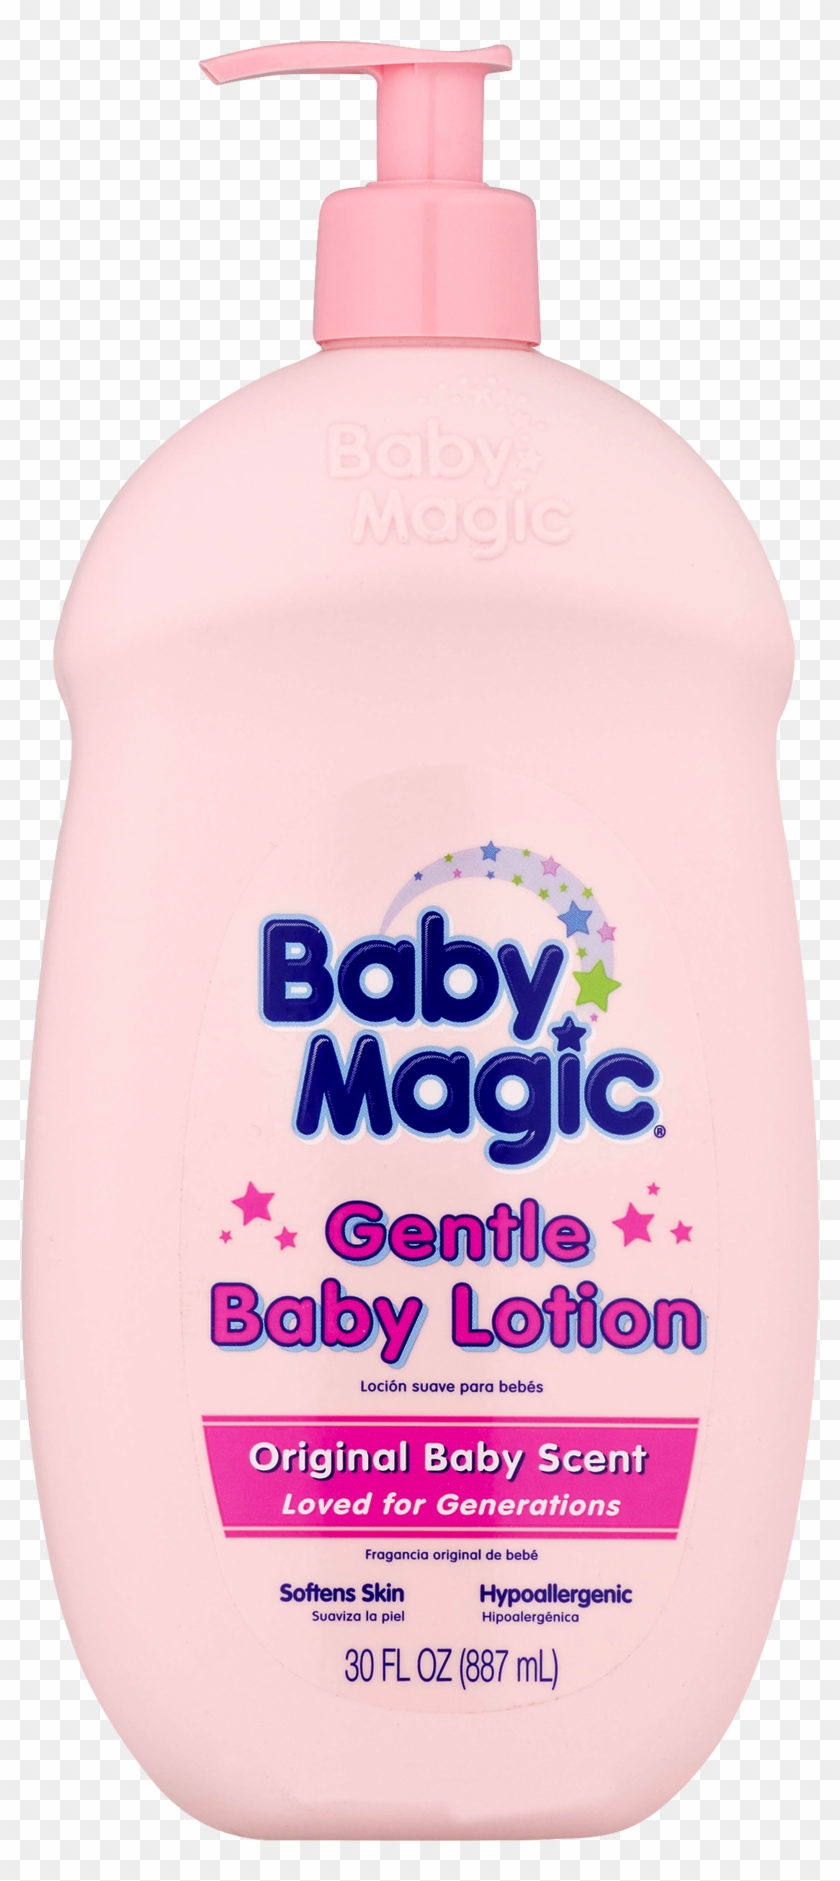 Baby Magic Gentle Baby Lotion Original Baby Scent, - Baby Magic Clipart #5124120